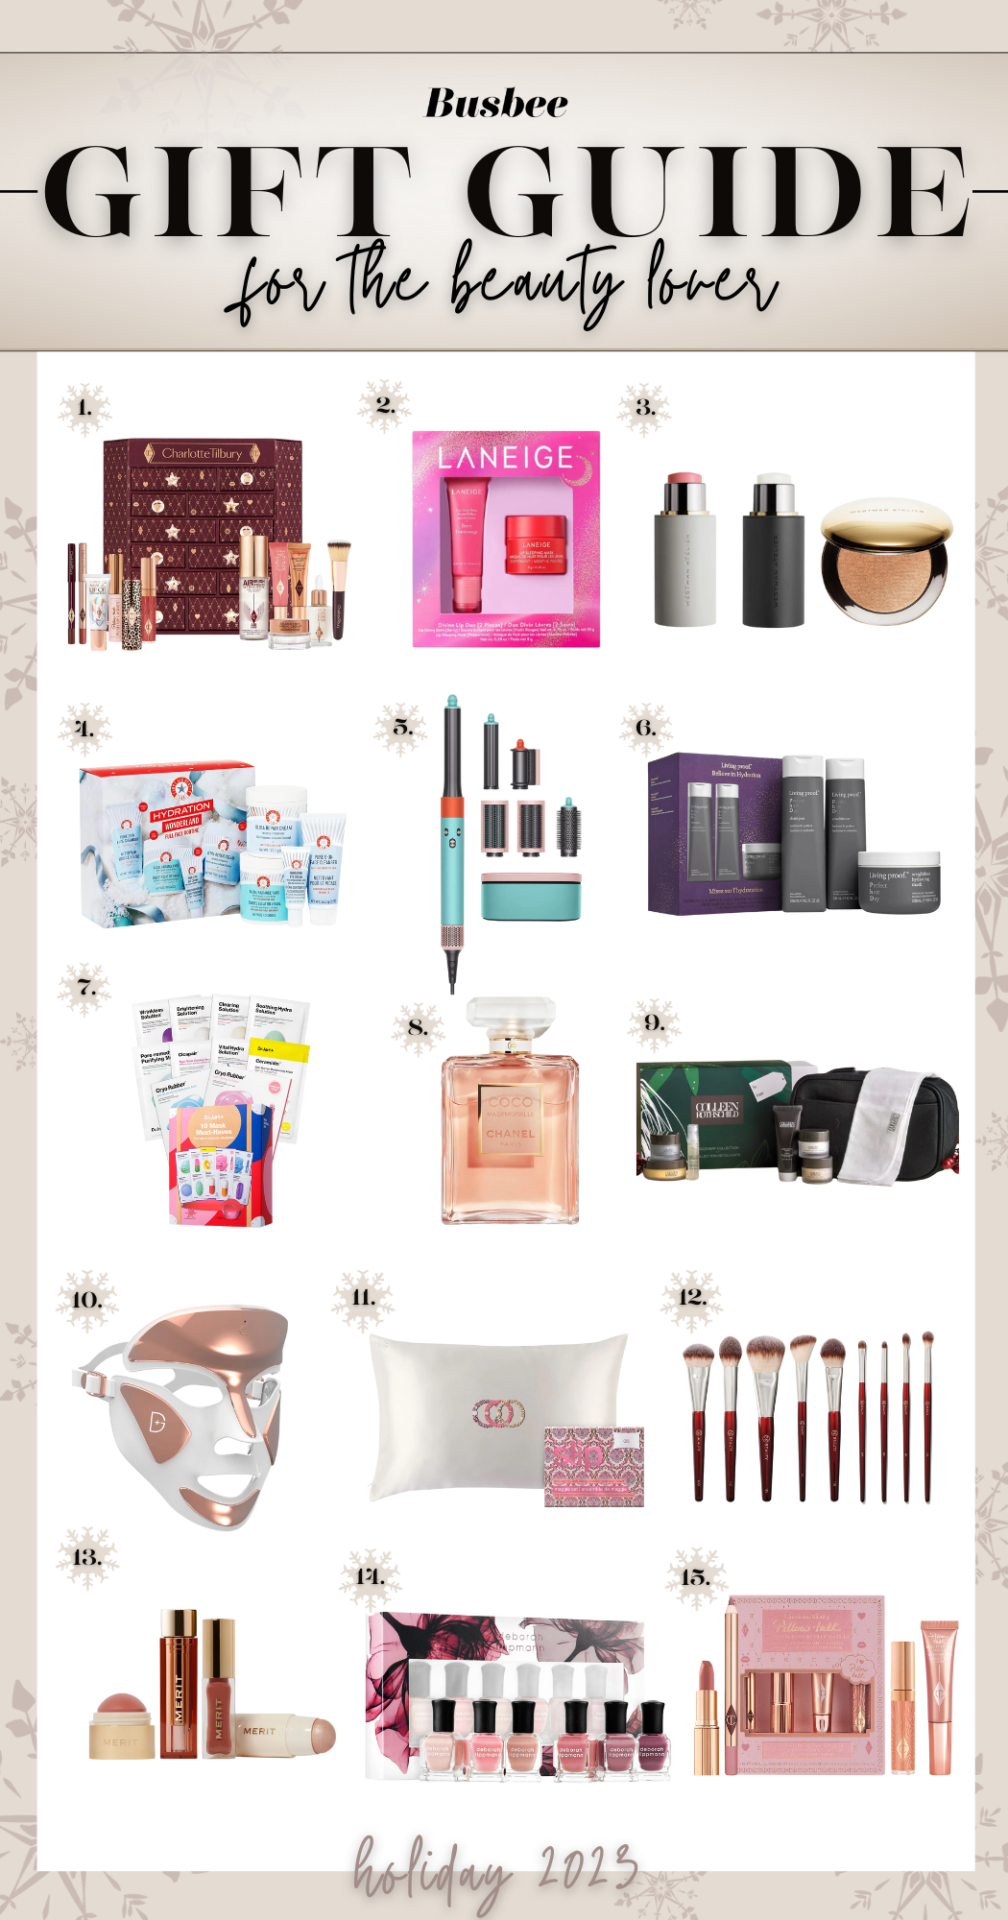 The Best Holiday Beauty Gifts That Will Sell Out Fast This Year!